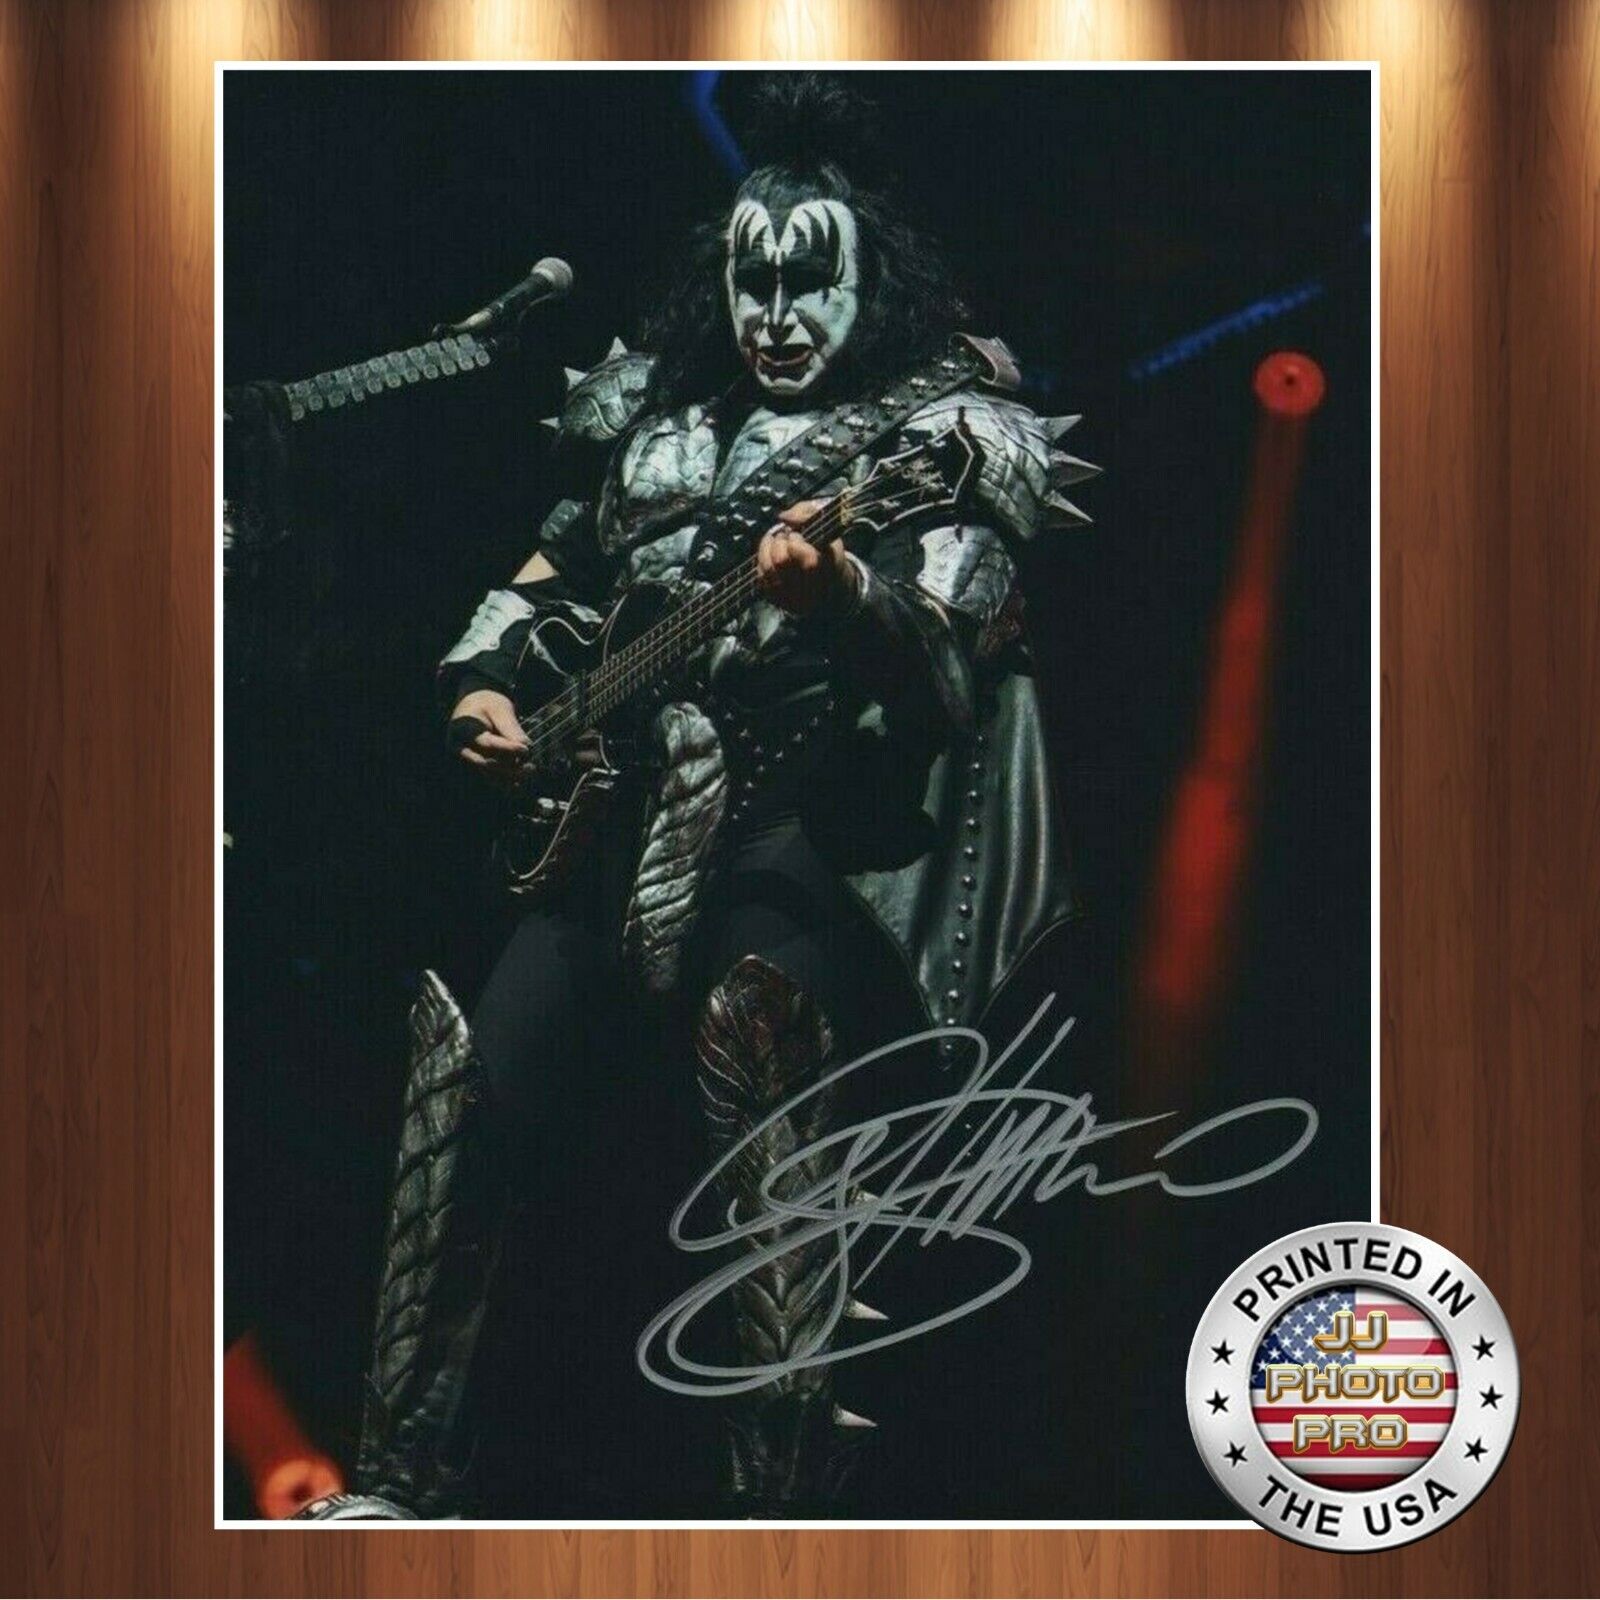 Gene Simmons Autographed Signed 8x10 Photo Poster painting (Kiss) REPRINT